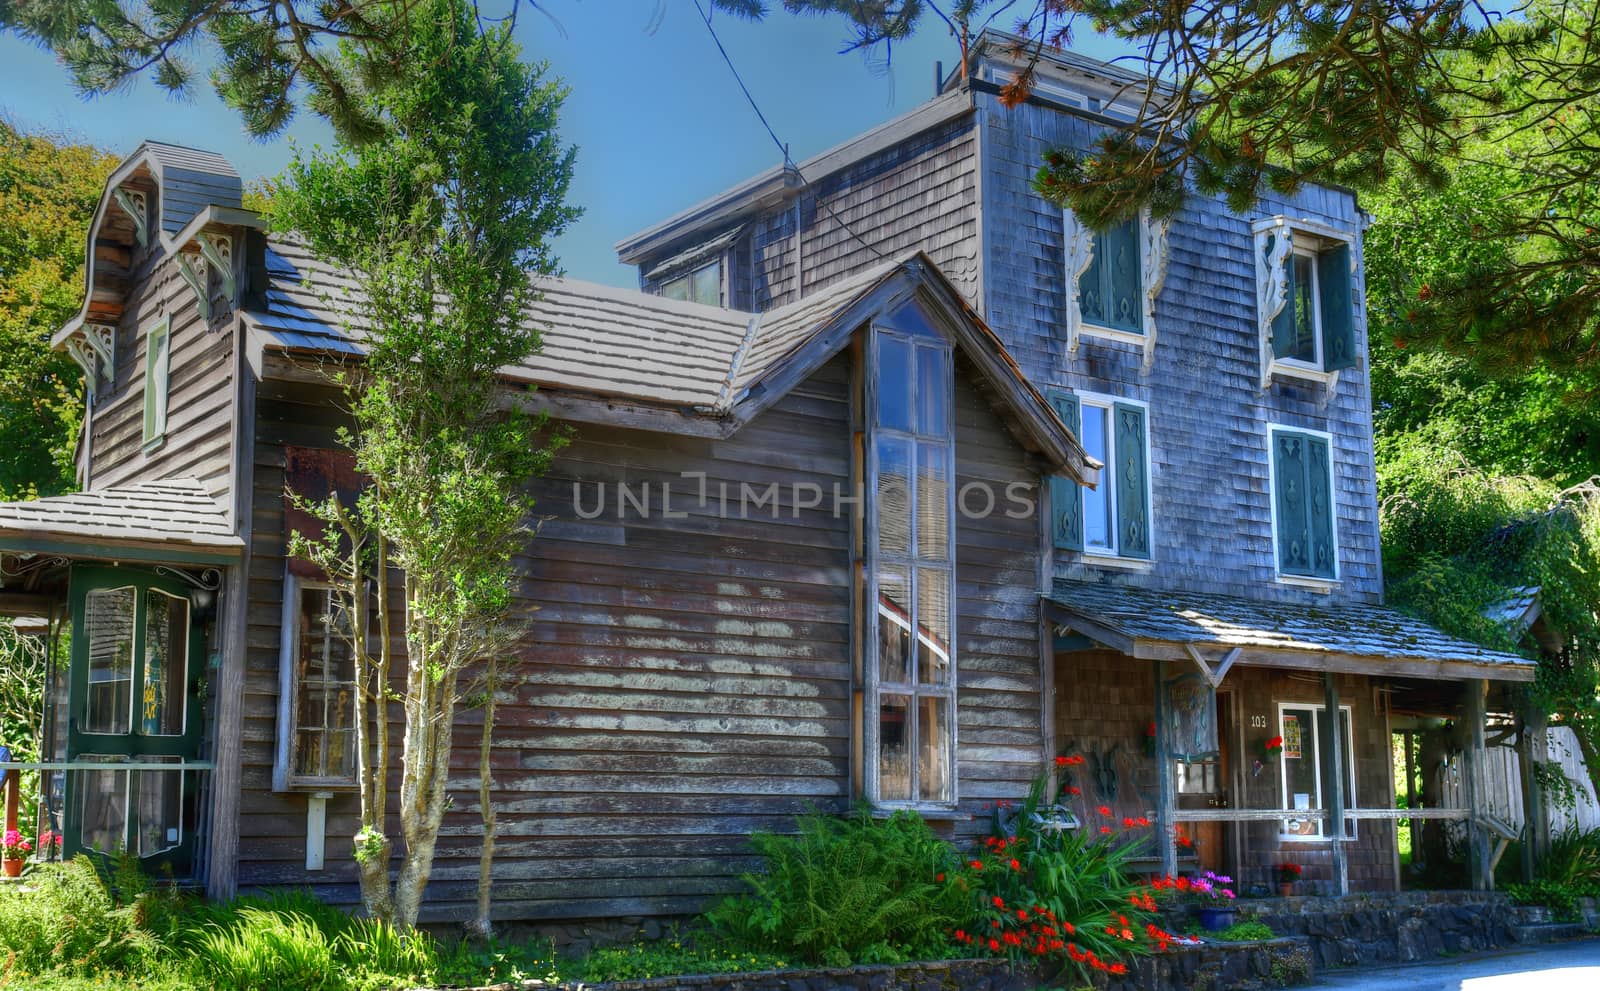 HDR view of house in Cannon Beach, Oregon